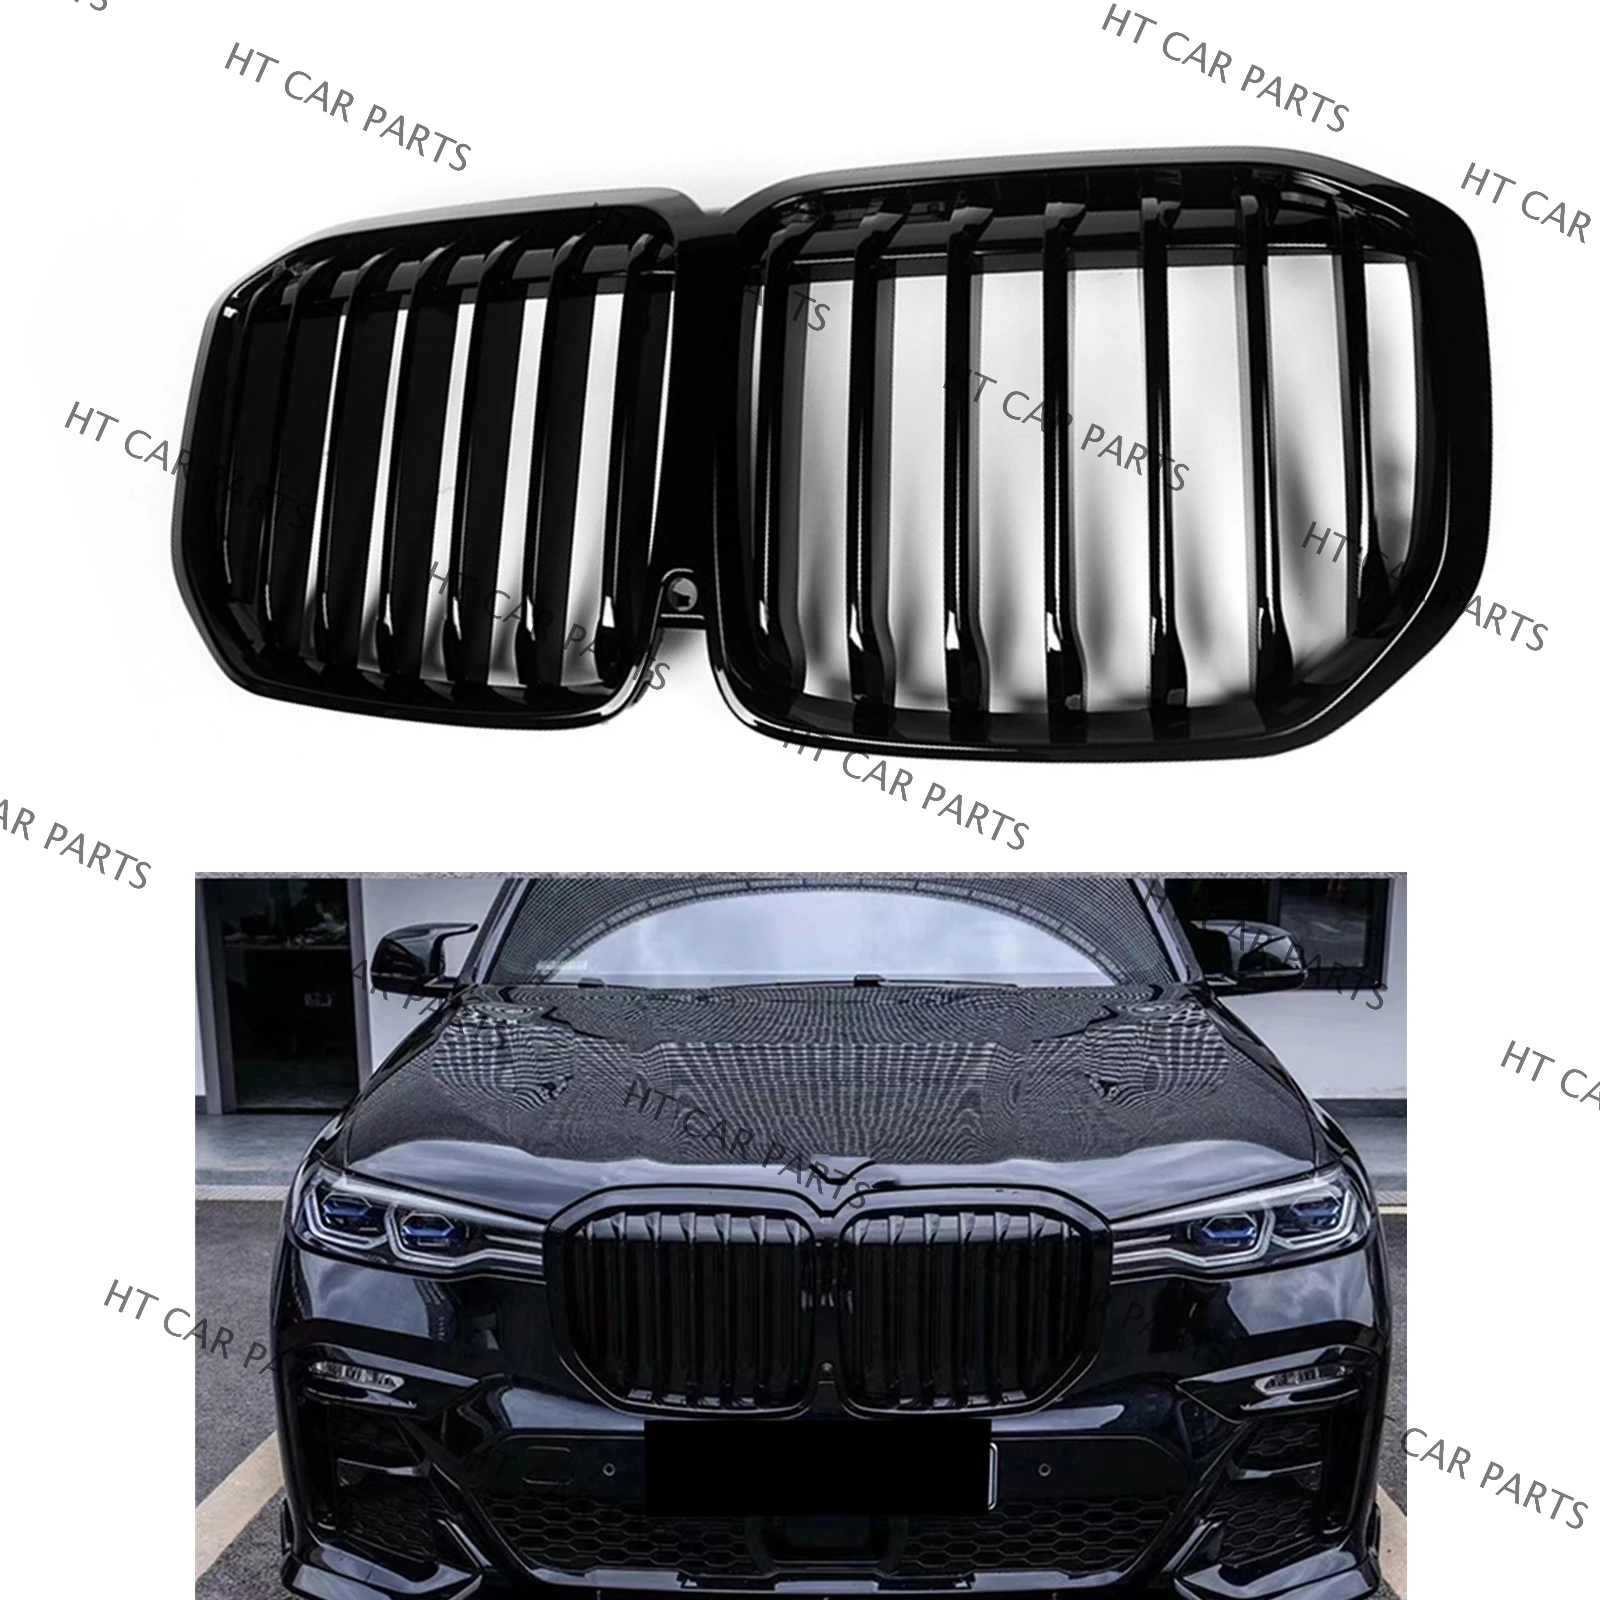 

For New BMW X7 G07 2019-2022 2019 2020 2021 2022 1 pcs/set Glossy Black Front Grill Grille (Without Emblem)